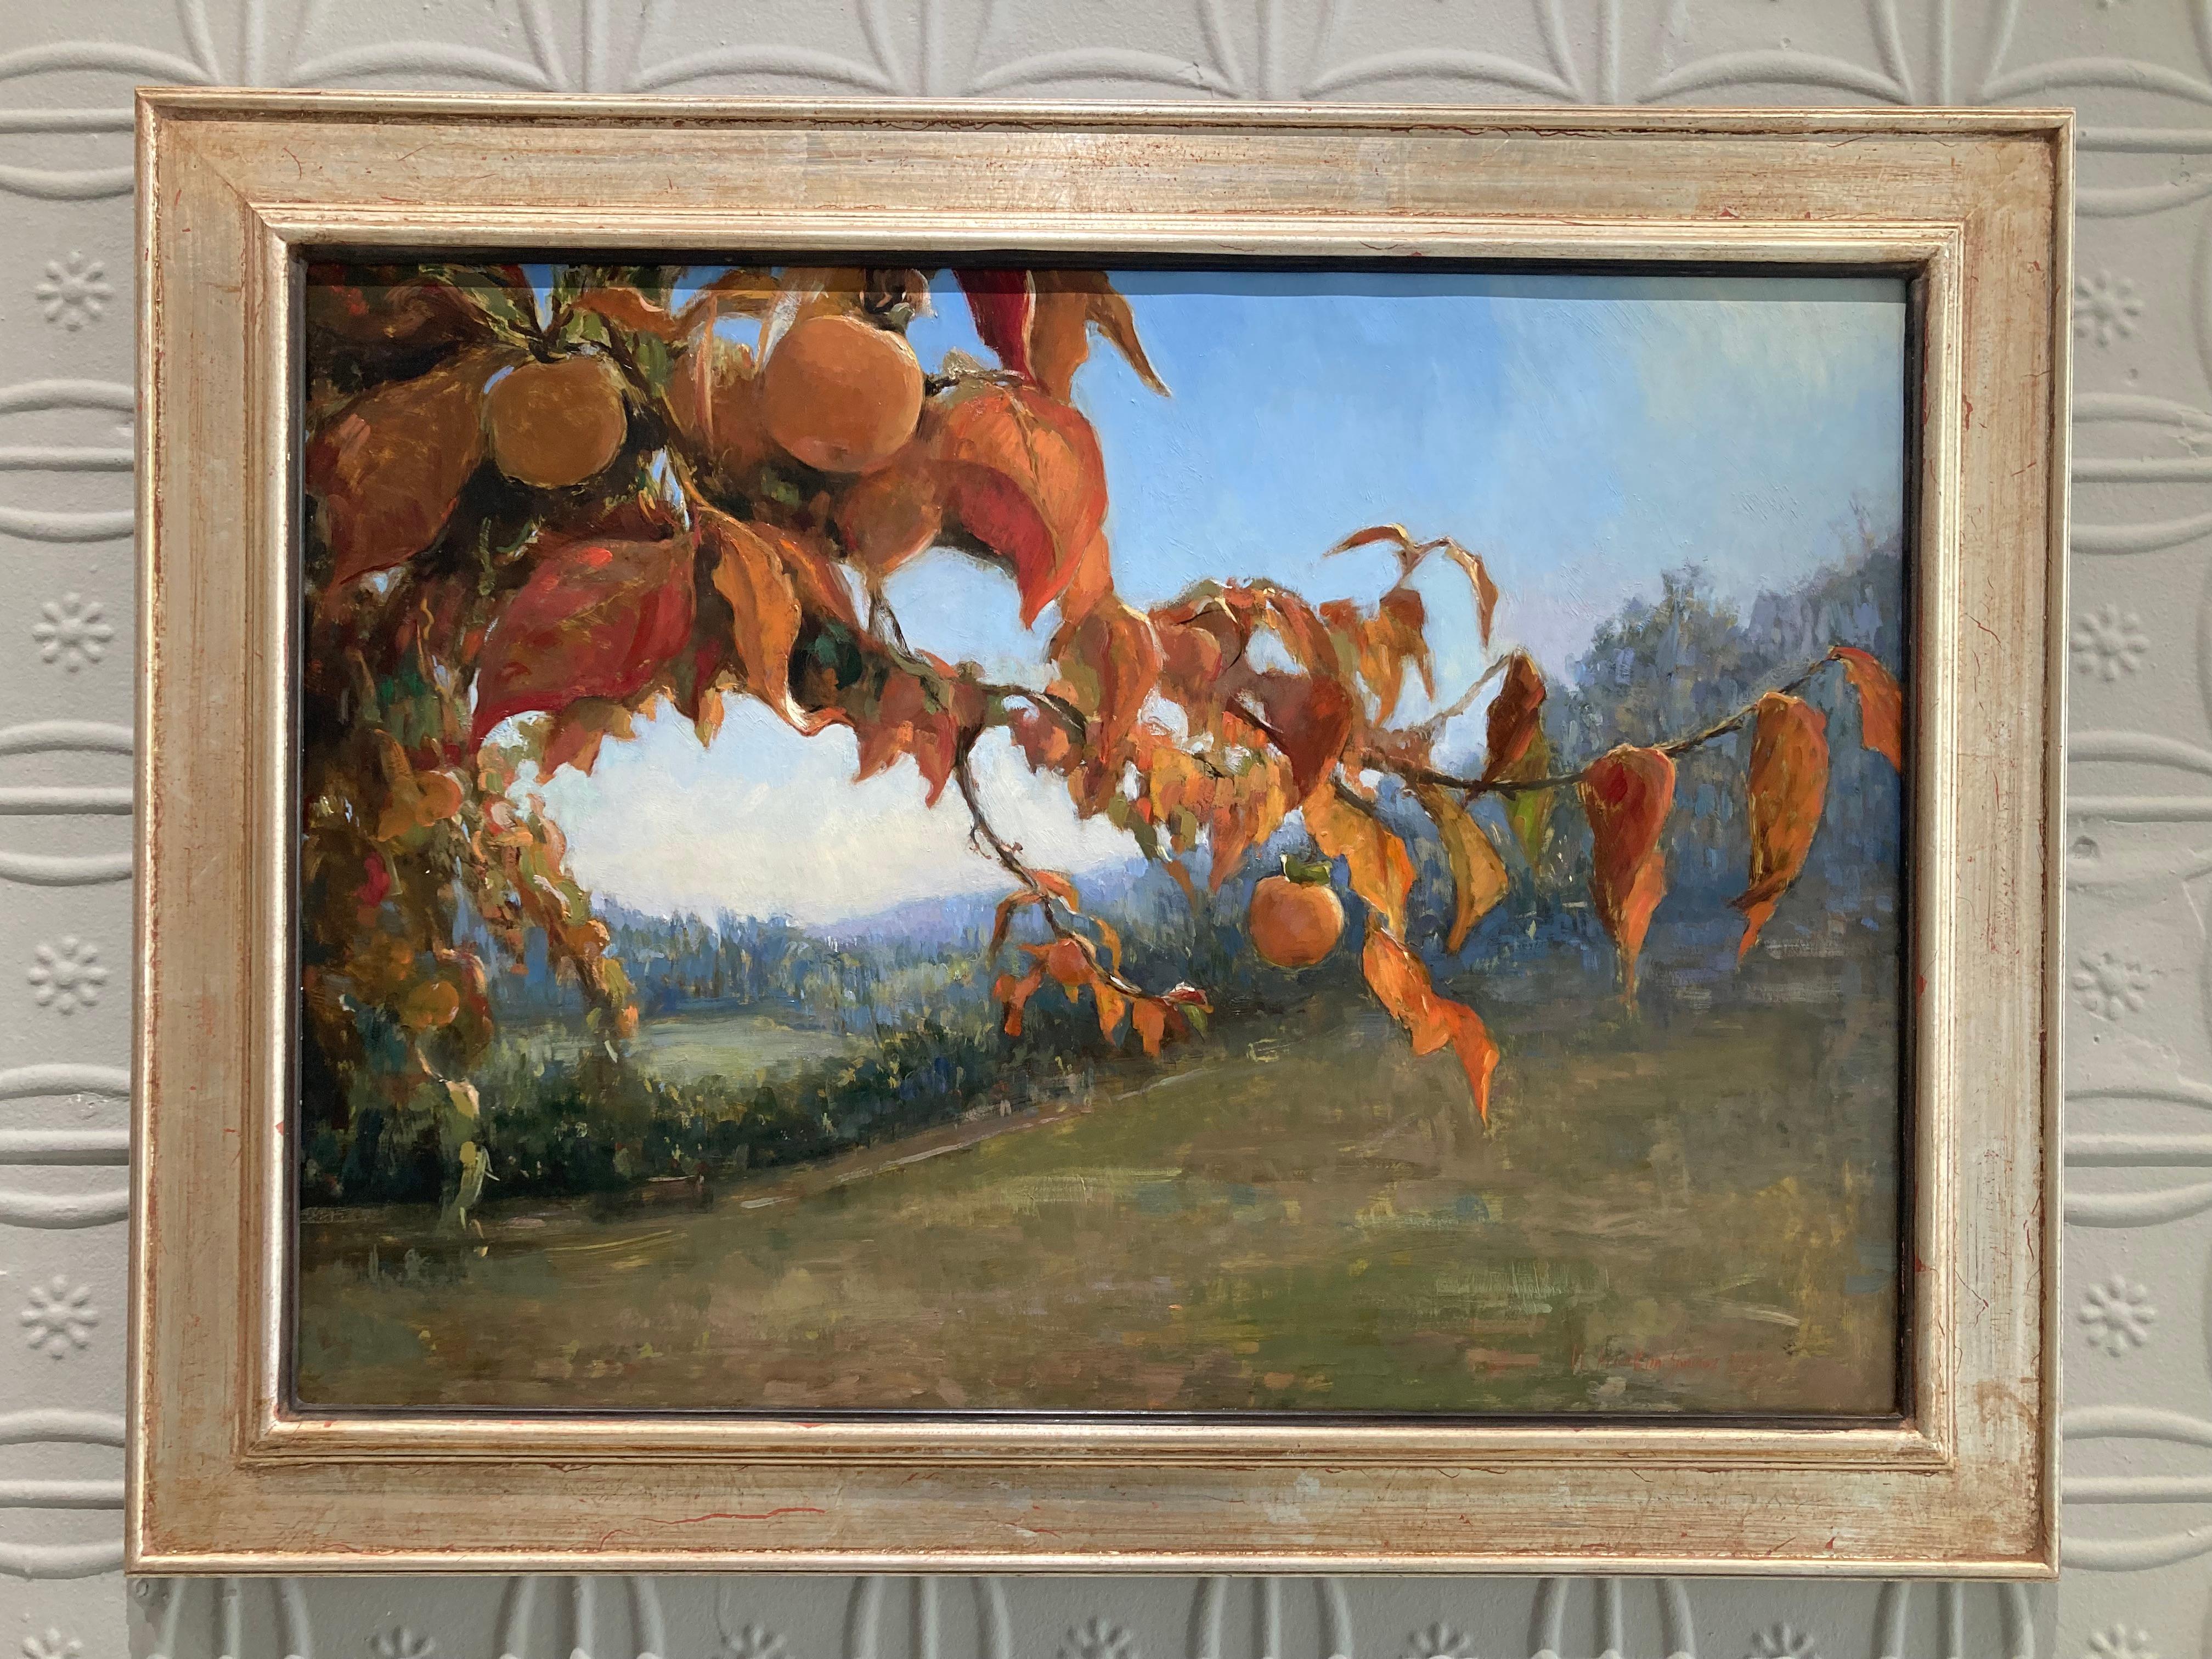 Diospero - realist oil painting of persimmon tree in full bloom, Tuscany - Painting by Melissa Franklin Sanchez